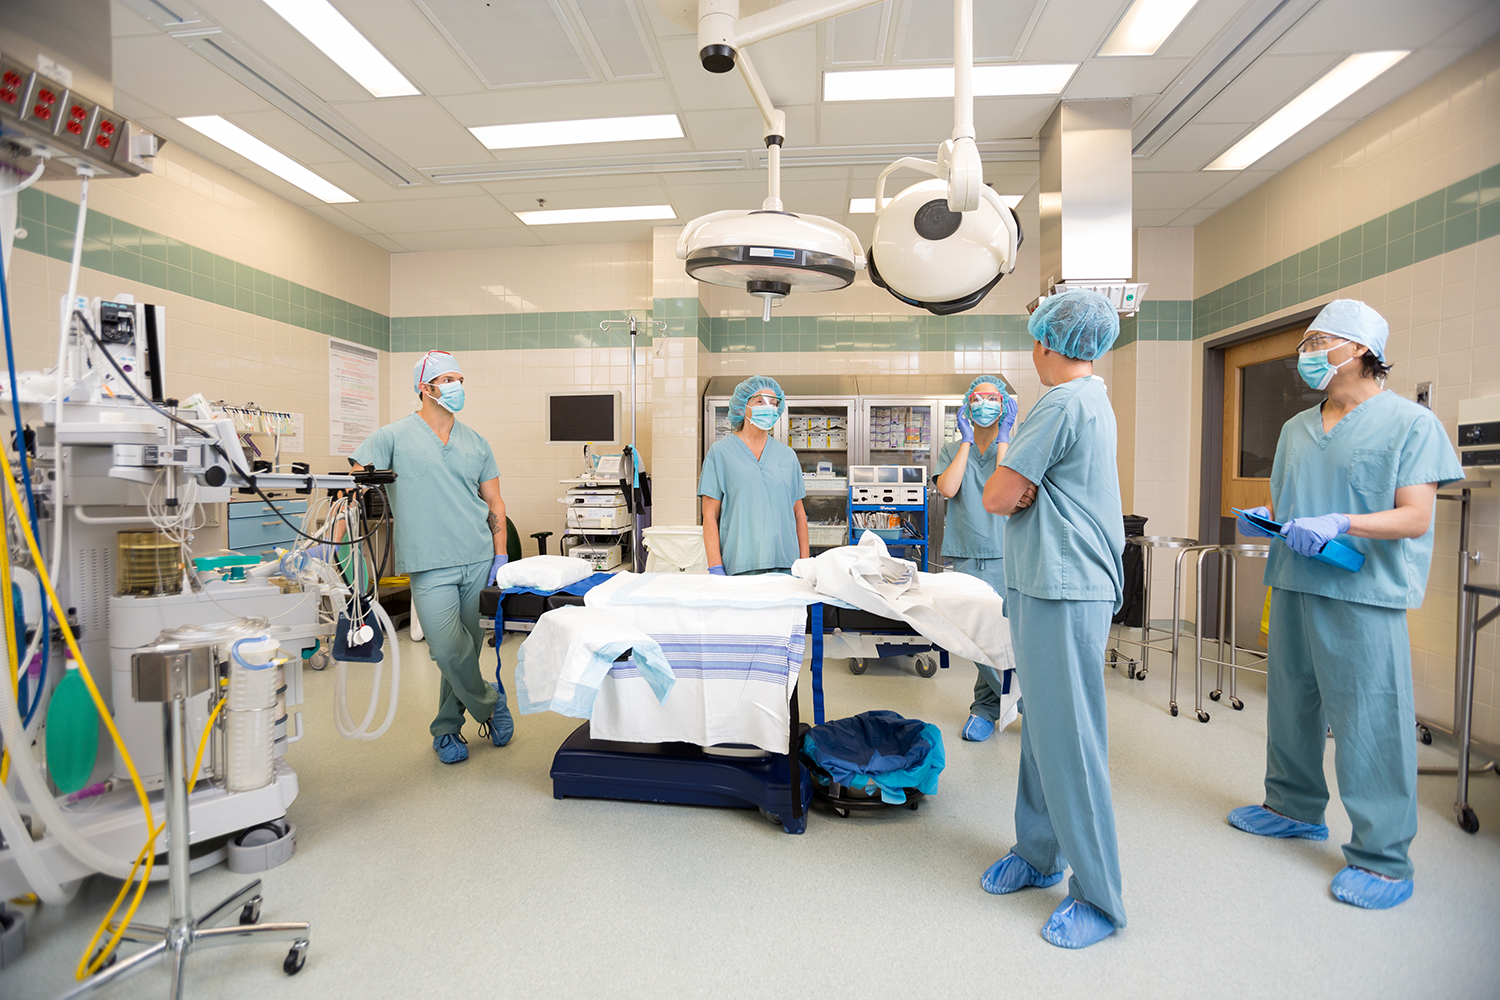 Space pressurization in an operating room helps keep pathogens from spreading.